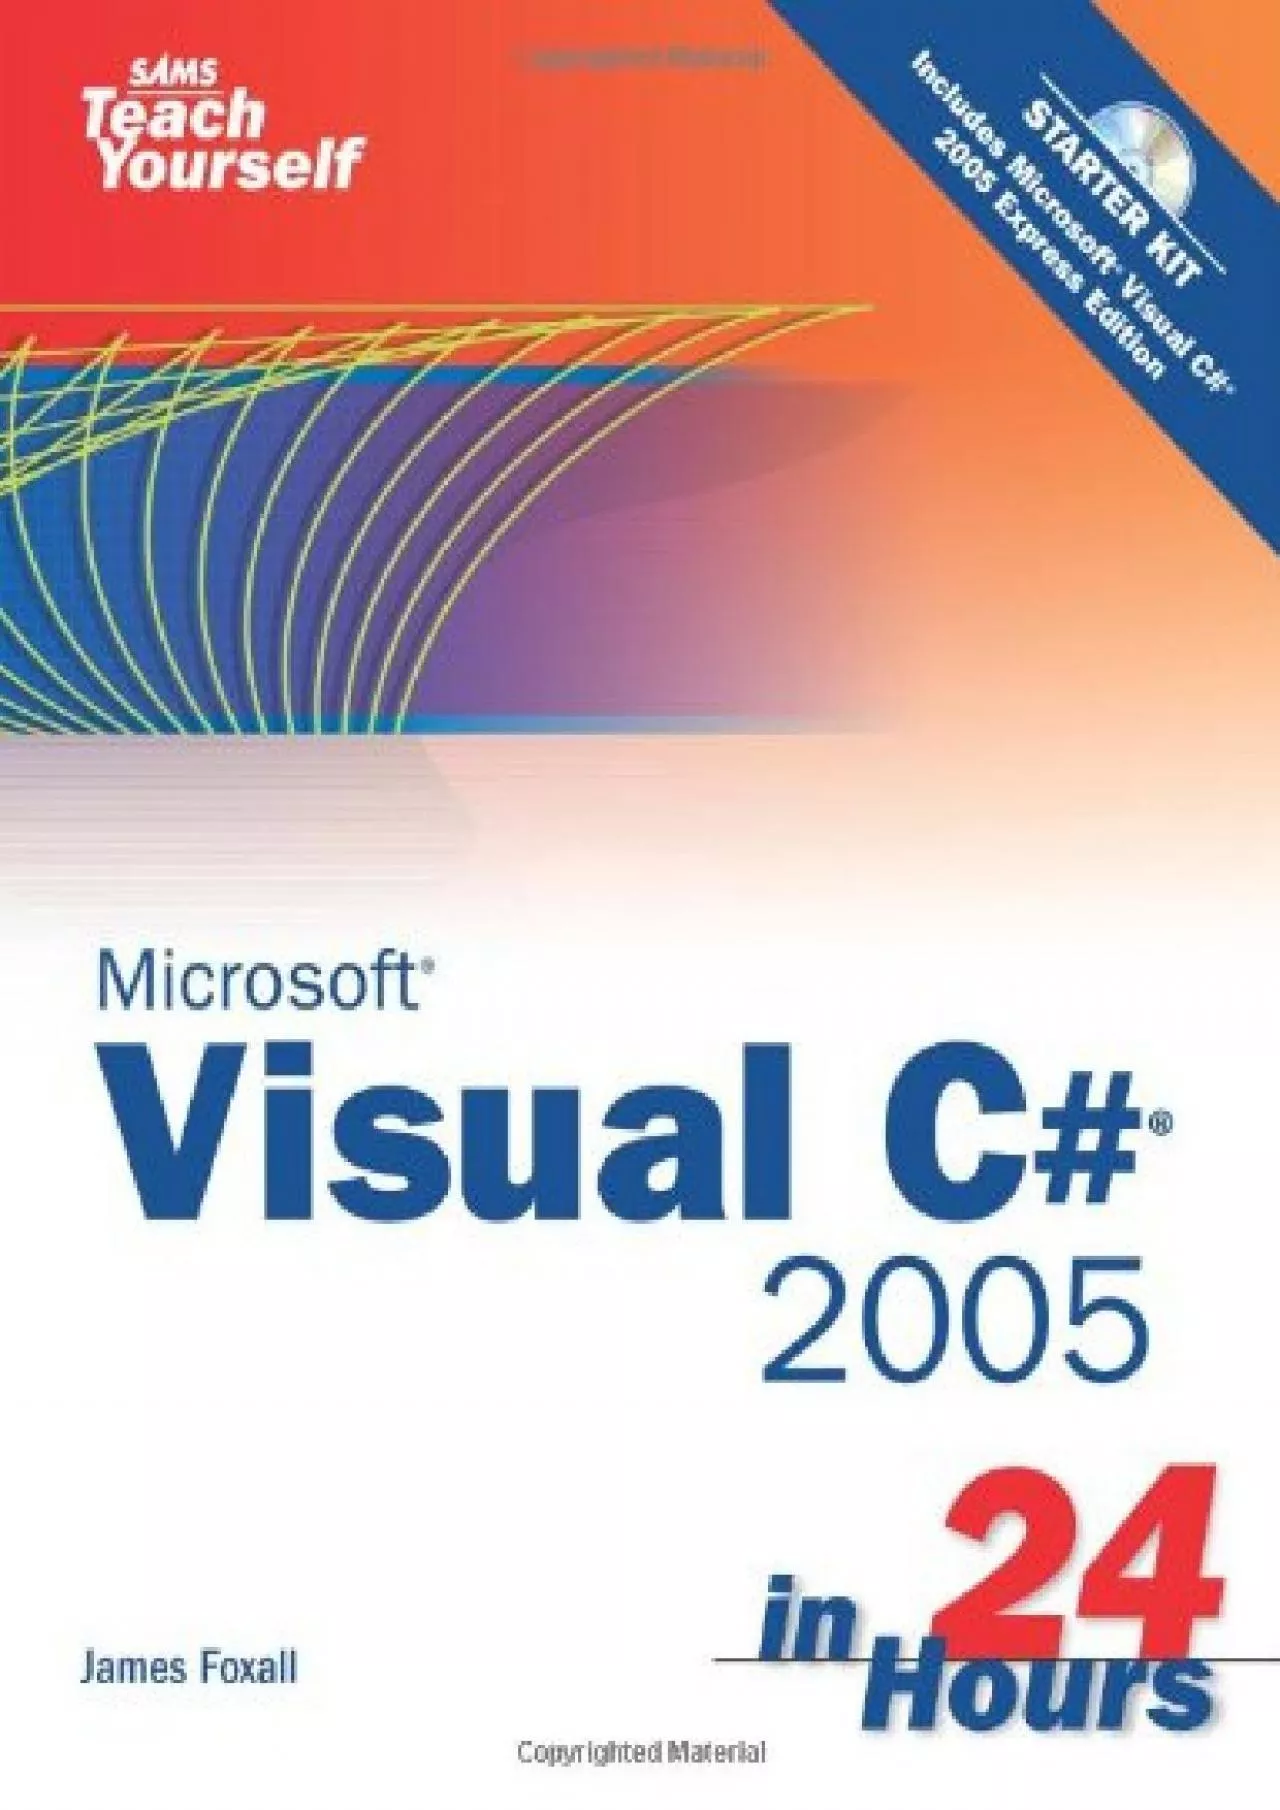 [DOWLOAD]-Sams Teach Yourself Visual C 2005 in 24 Hours Complete Starter Kit